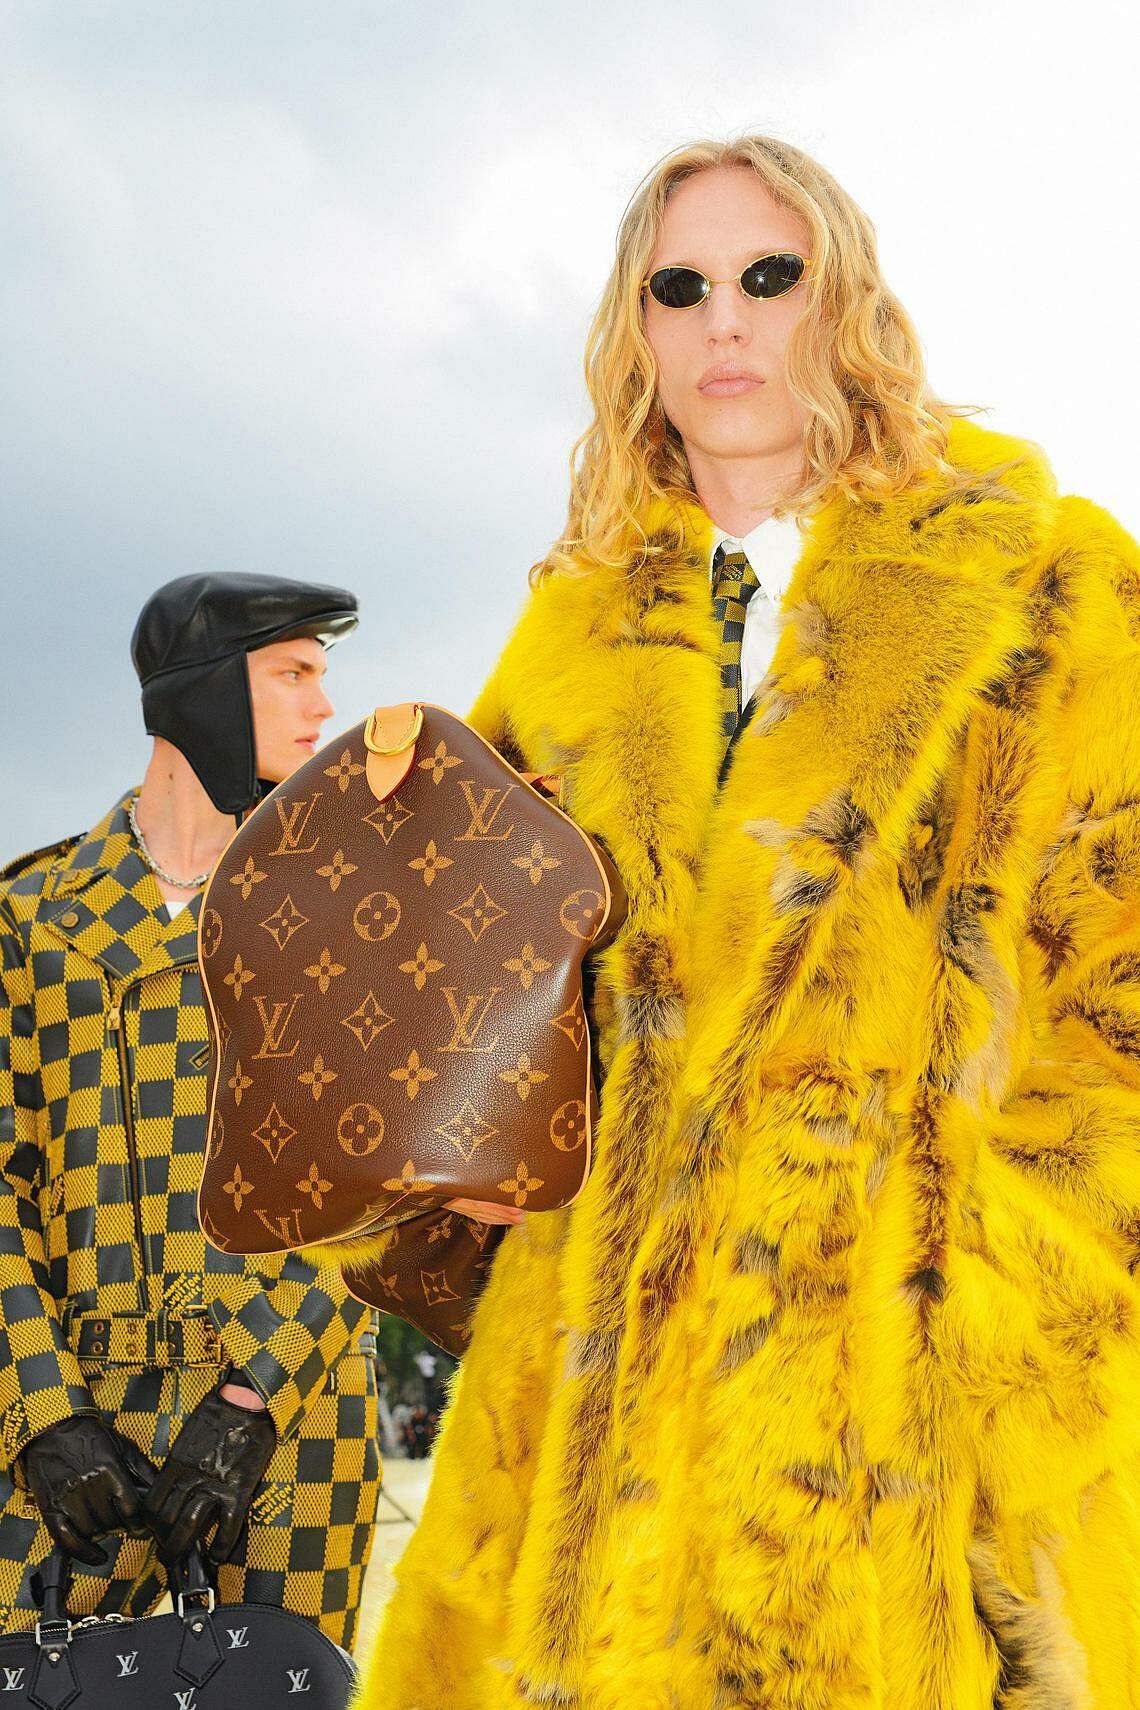 Louis Vuitton's Millionaire Speedy Bag is Here, Courtesy of